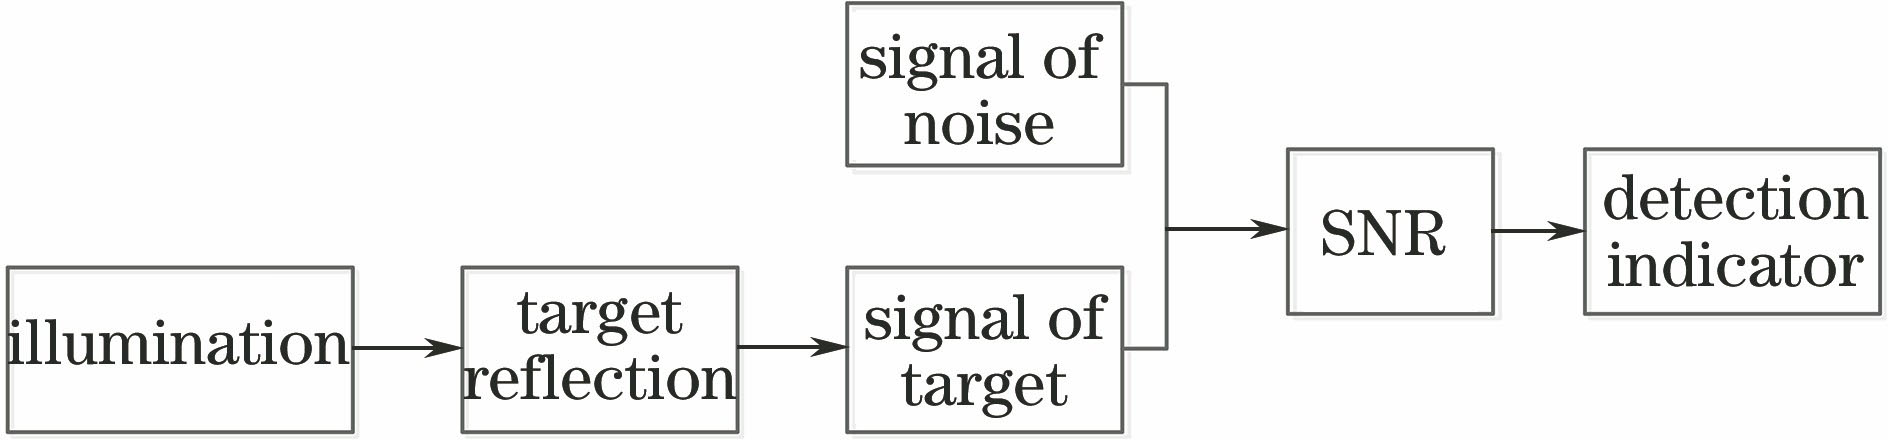 Flow chart of detection capability calculation